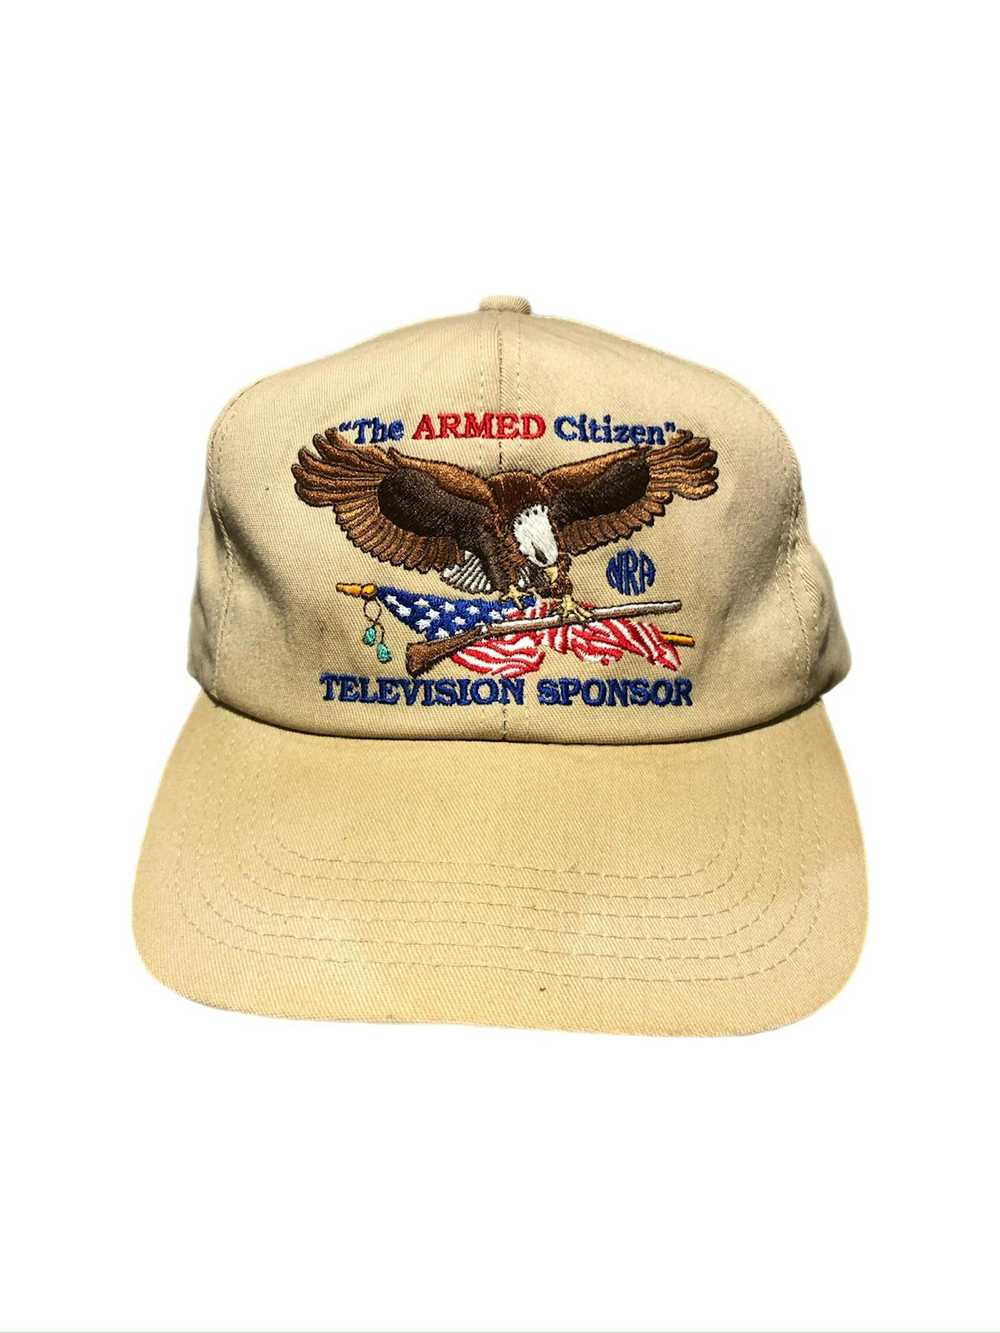 Vintage 90s “The Armed Citizen” NRA Snapback - image 1